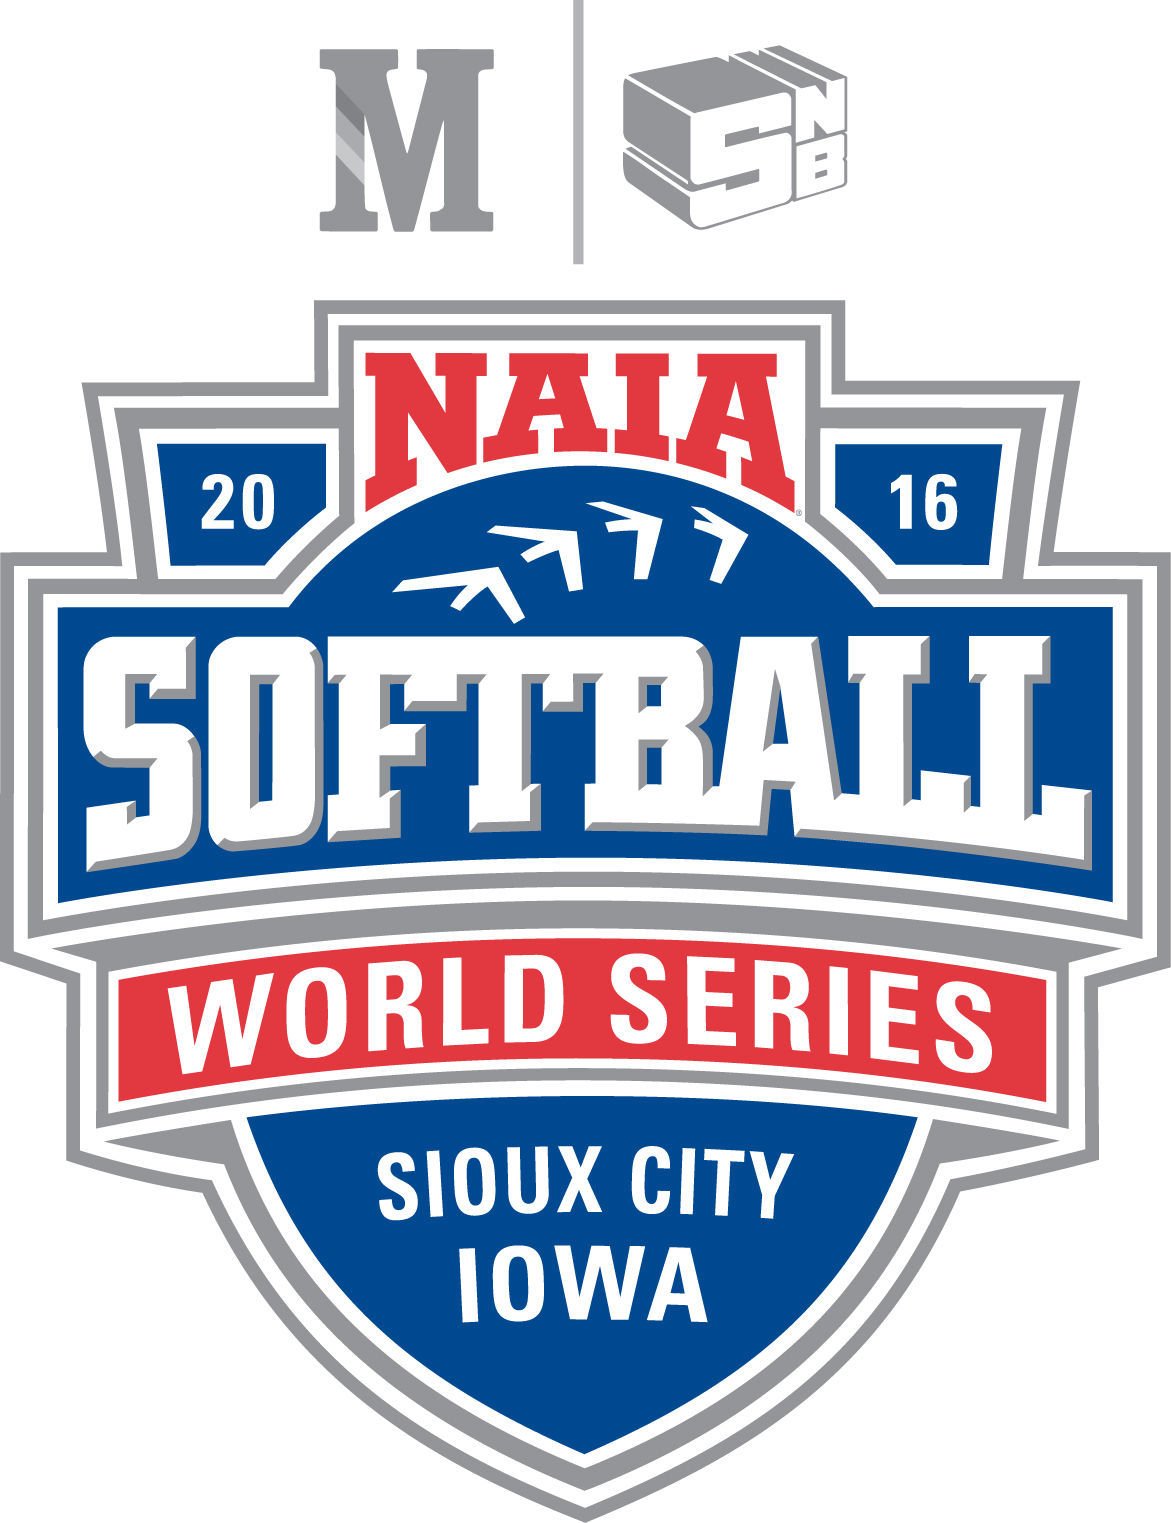 Softball World Series returns to Sioux City College